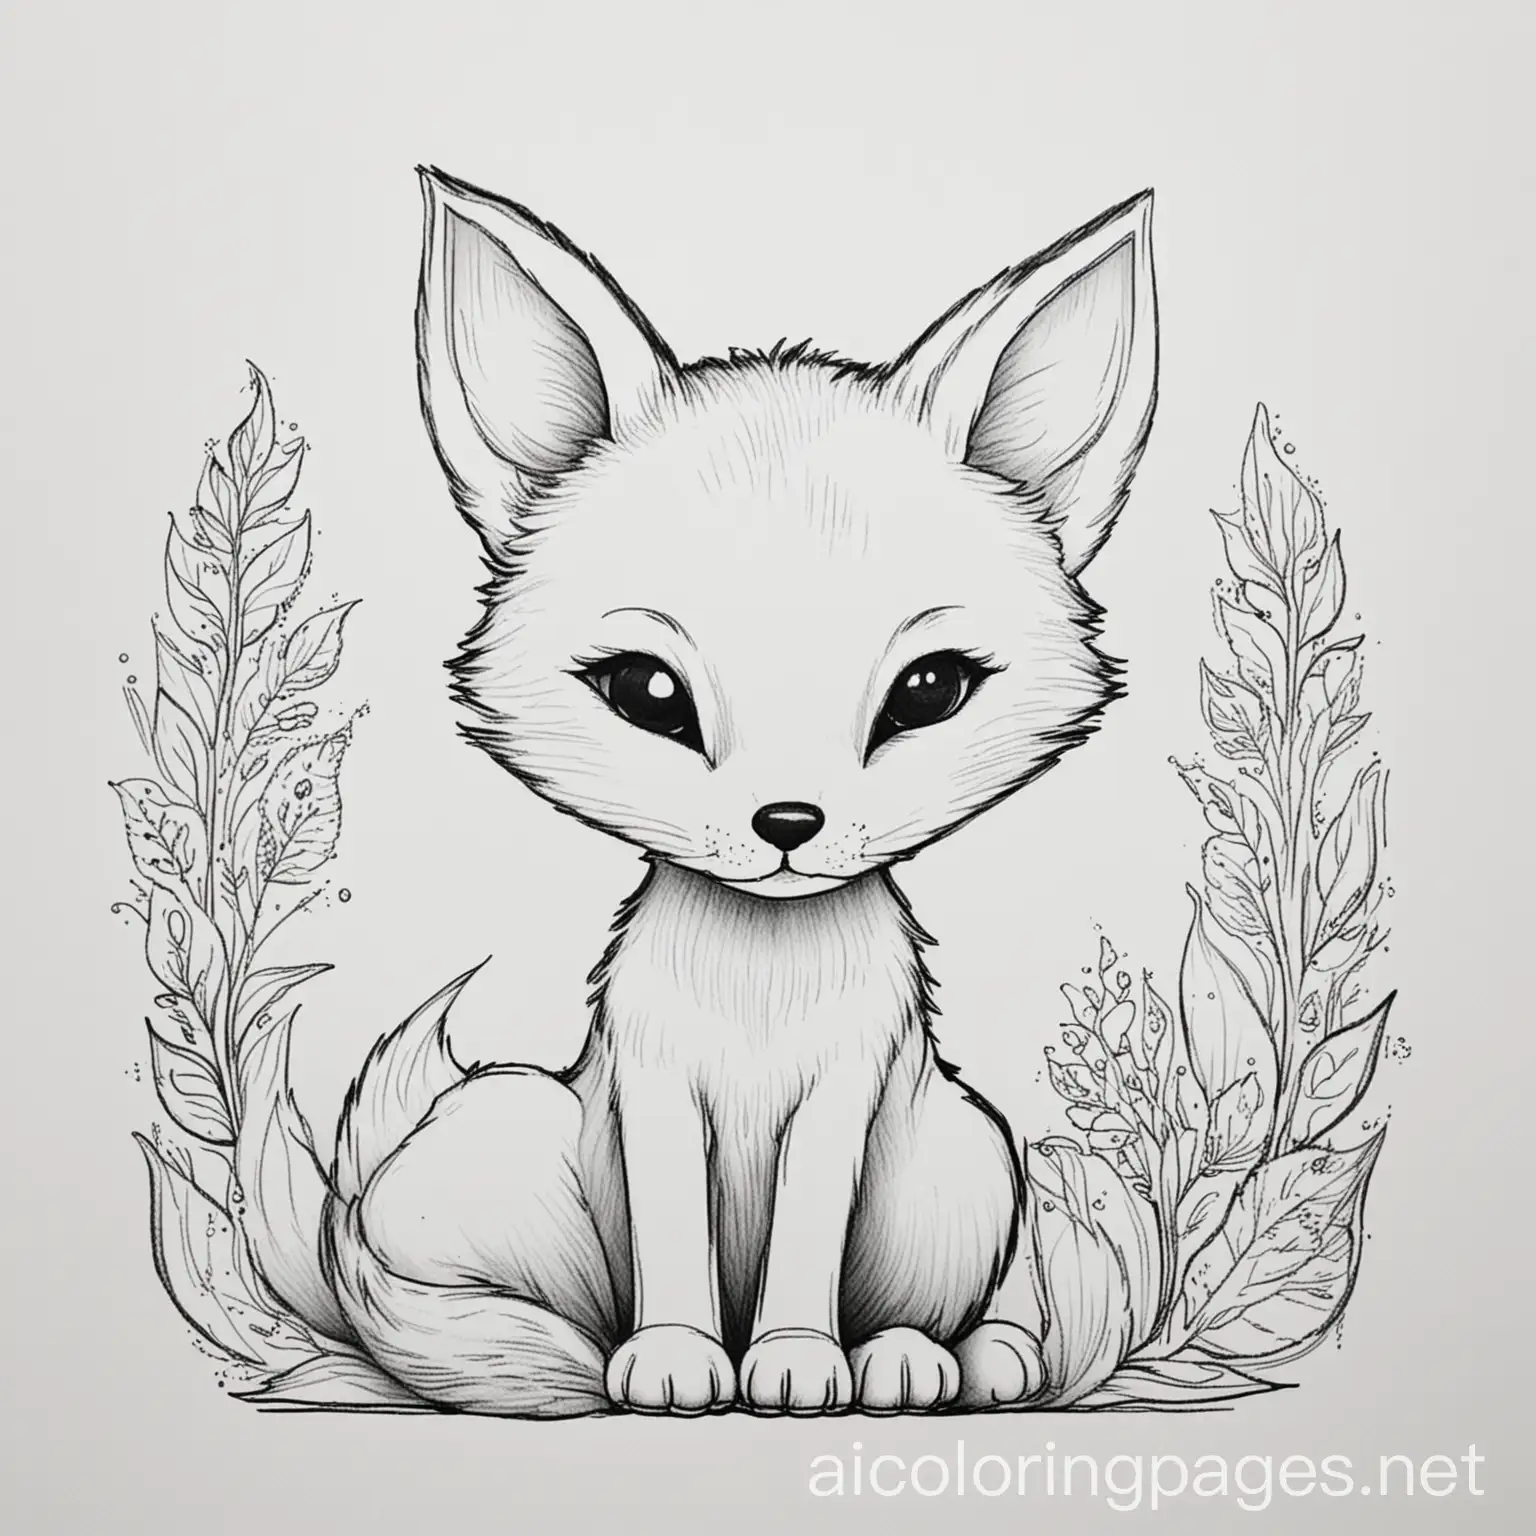 Little-Fox-Coloring-Page-with-Simple-Line-Art-on-White-Background